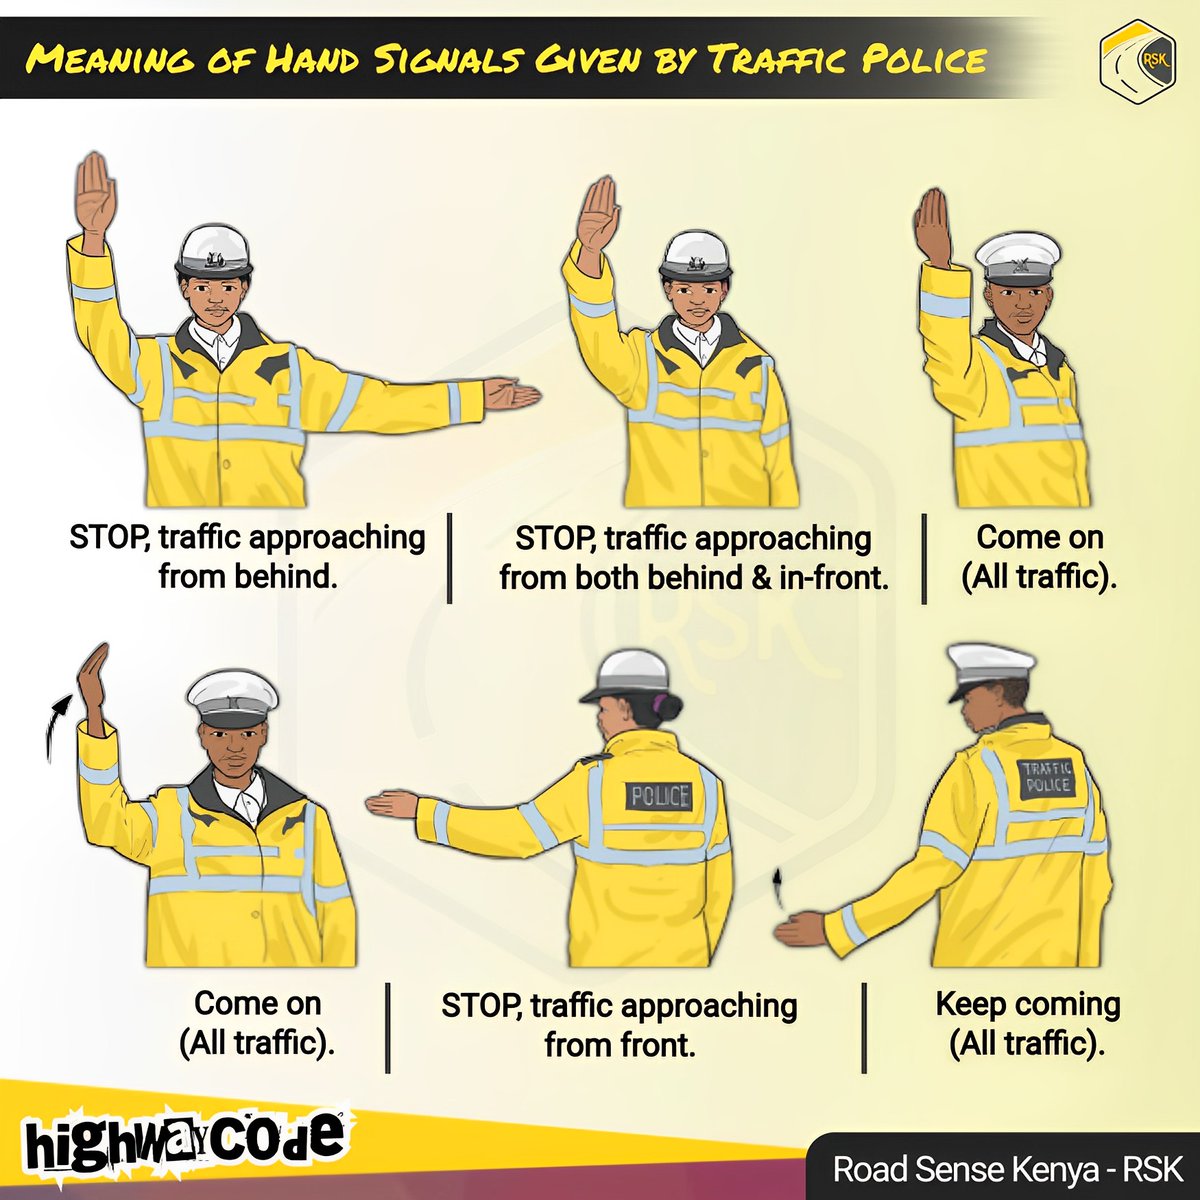 #TrafficSignals: Meaning of hand signals given by Traffic Police Officers. @ntsa_kenya @PoliceKE.